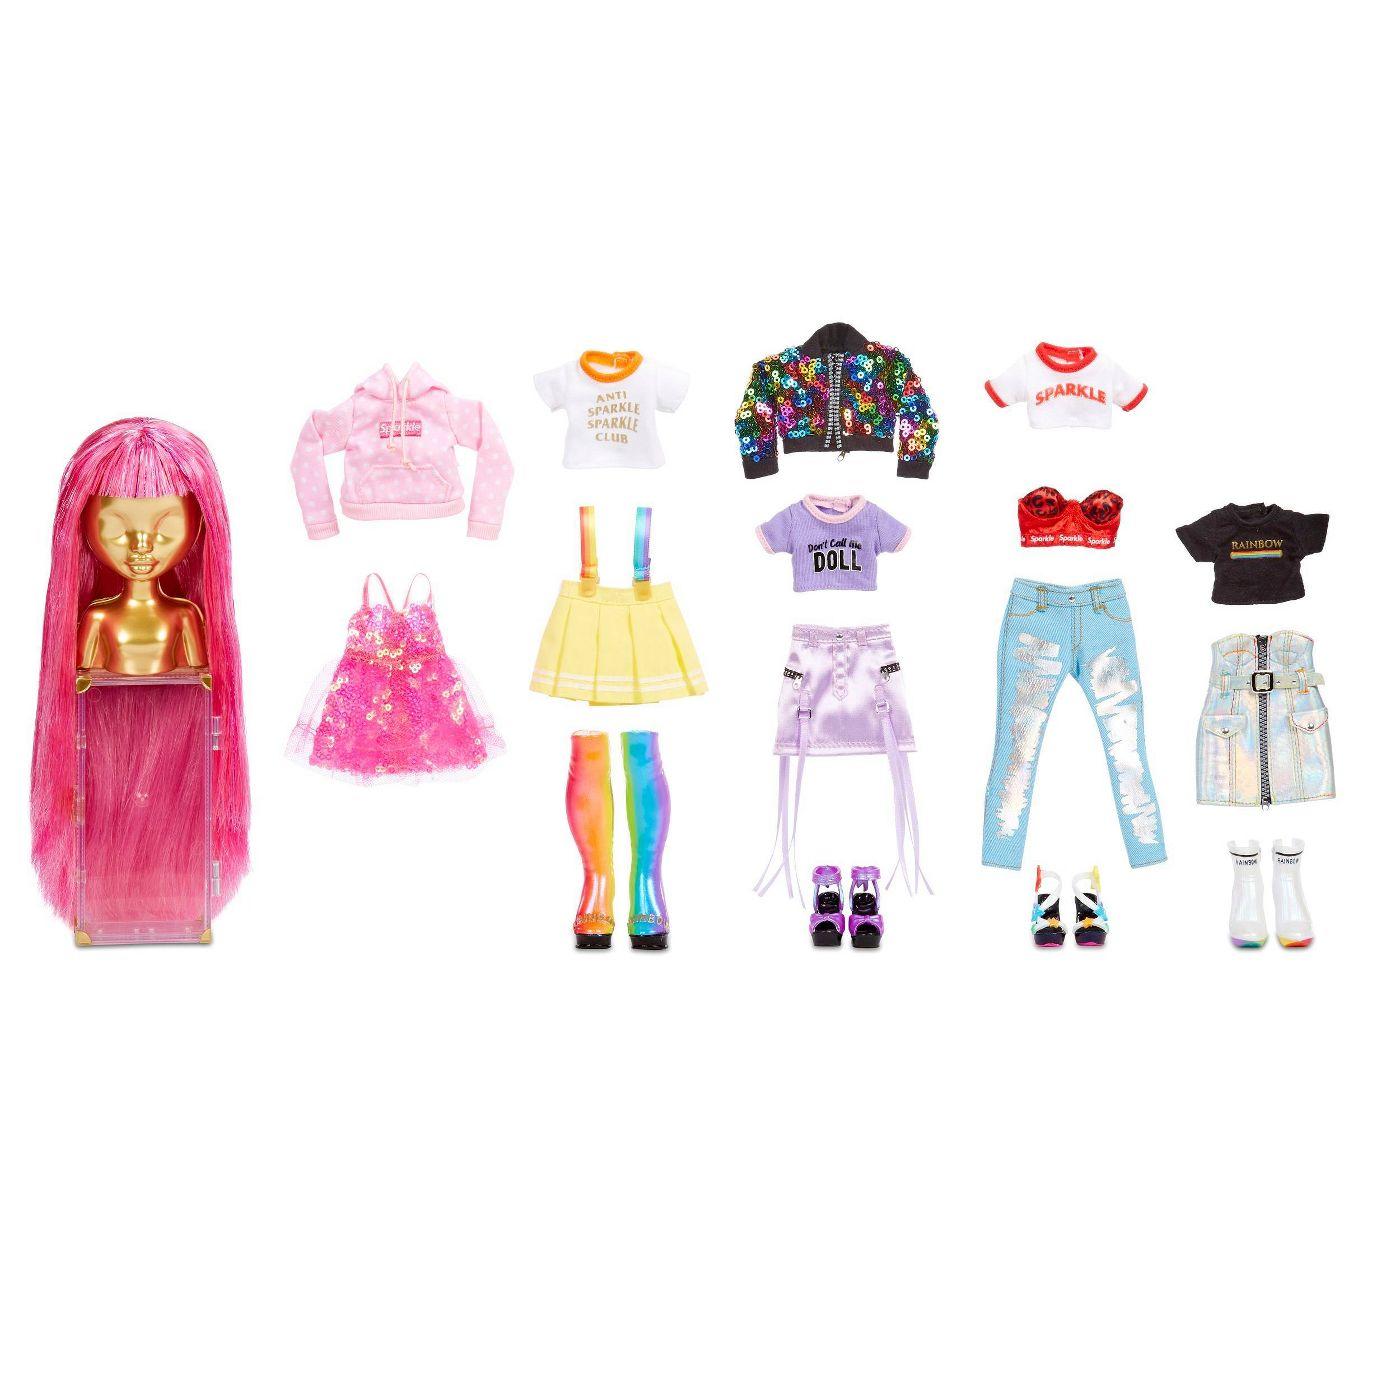 Rainbow High Fashion Studio – Exclusive Doll with Rainbow of Fashions - Avery Styles